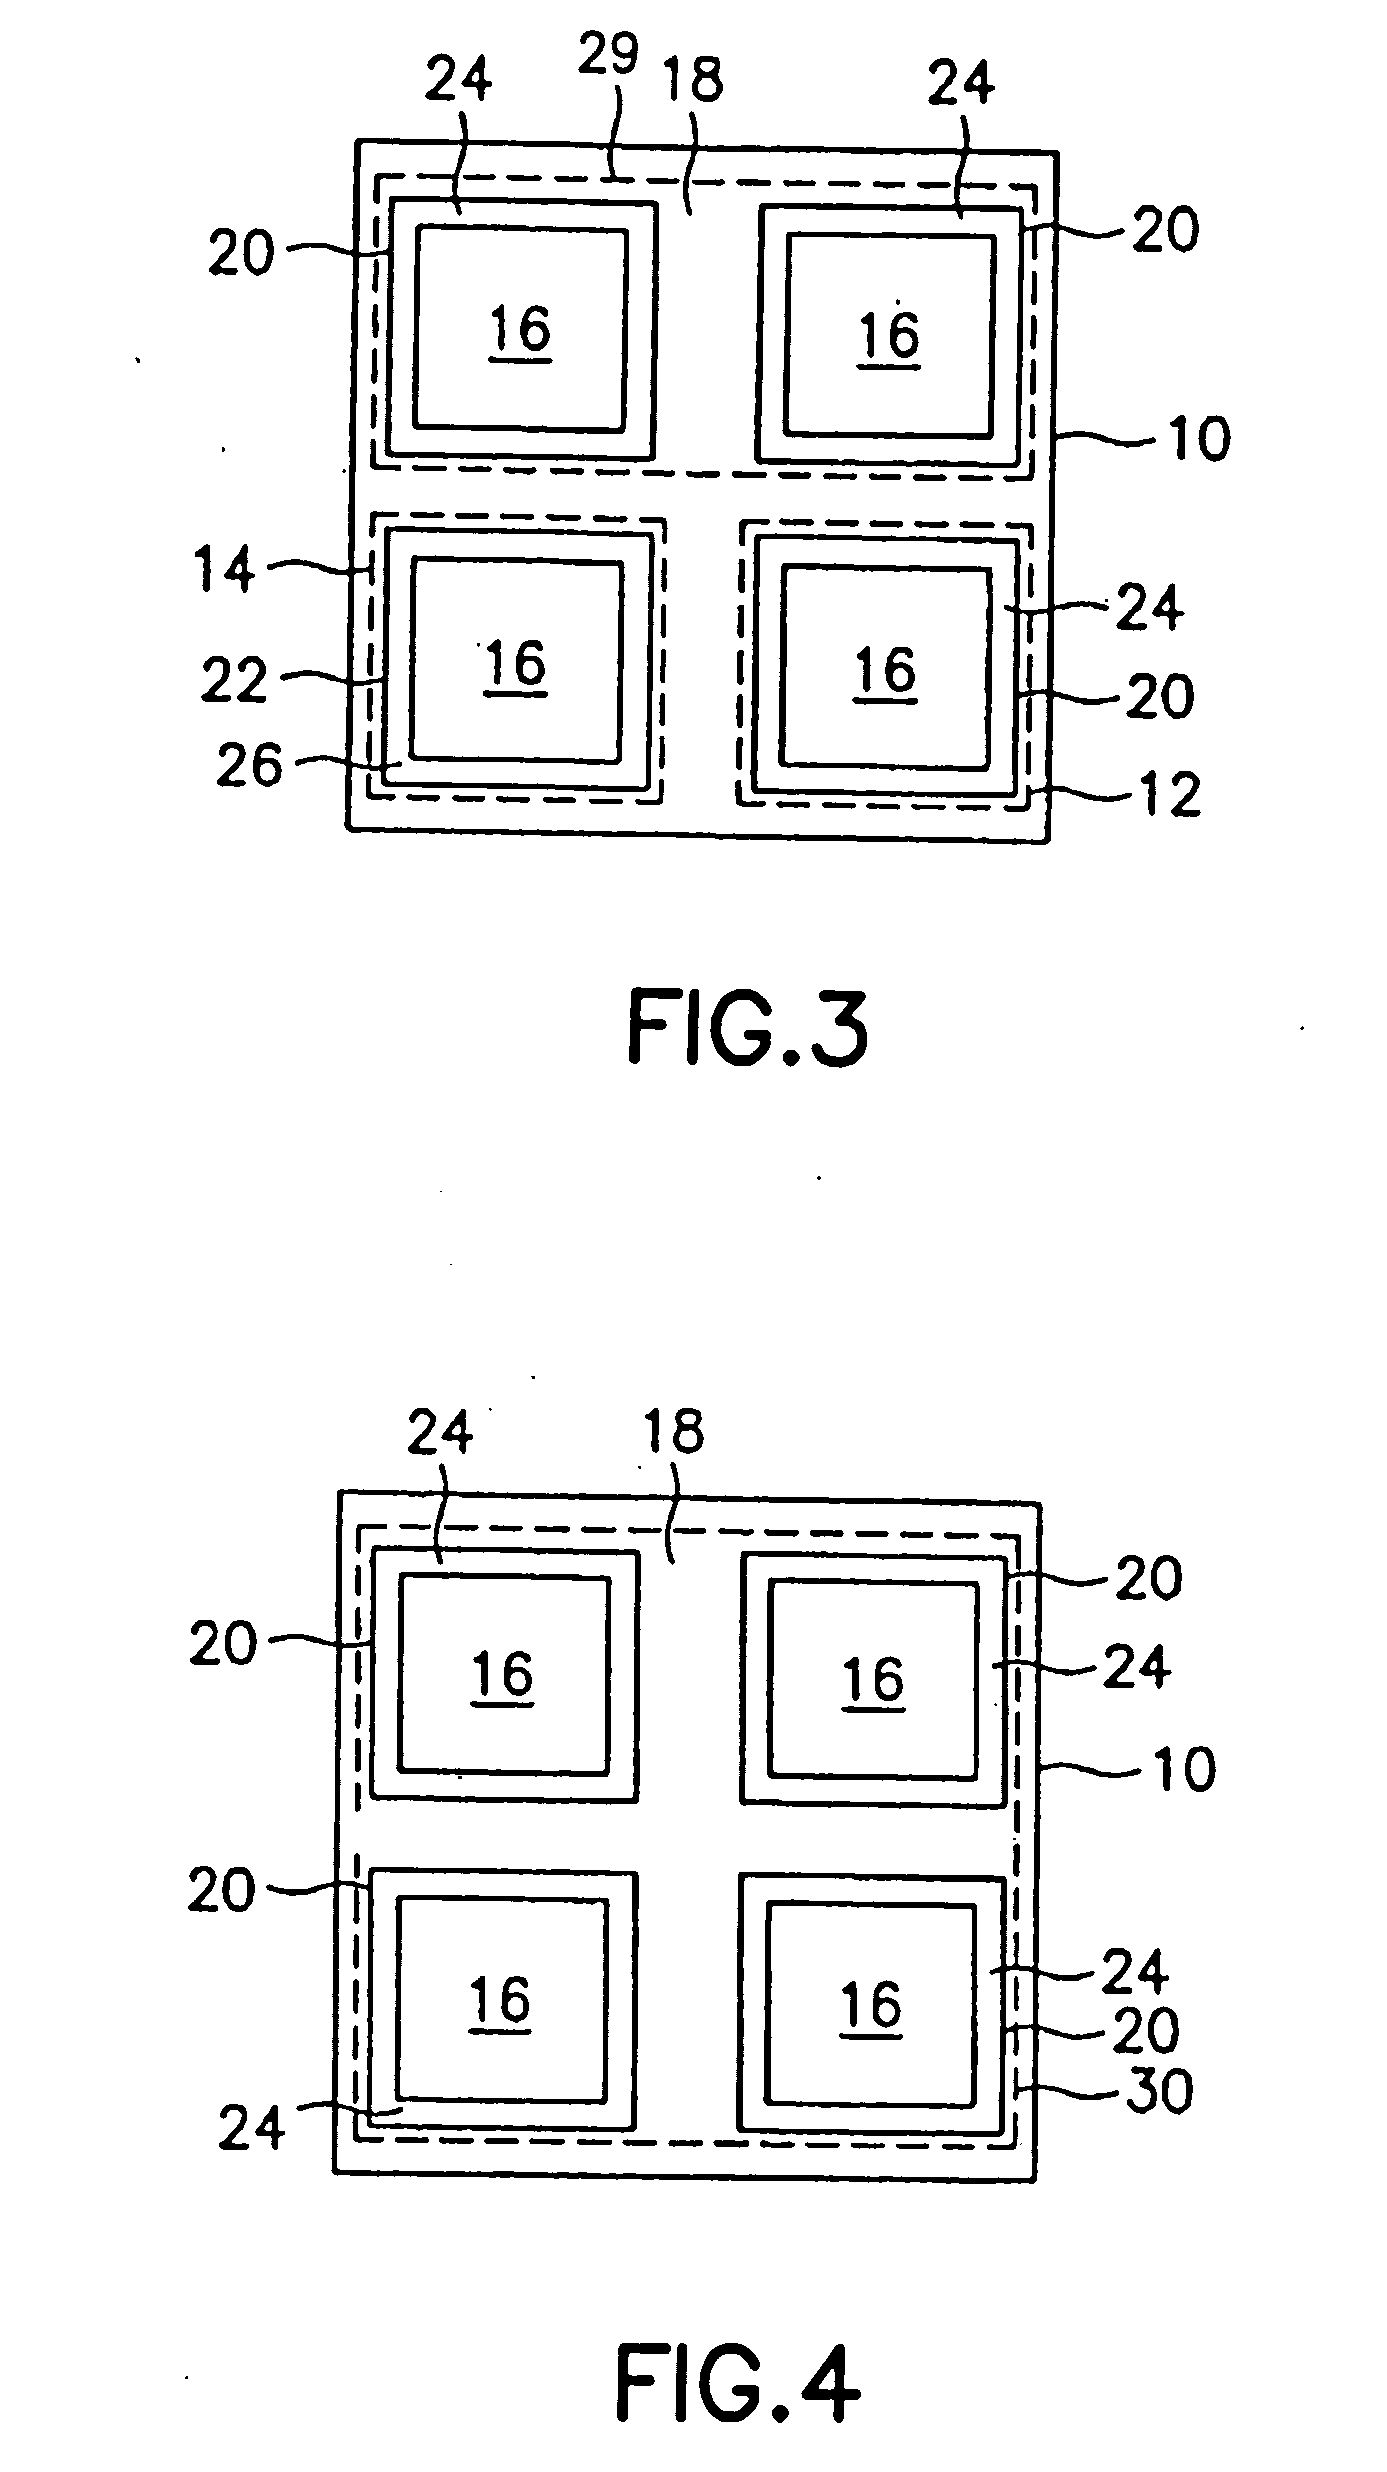 Semiconductor package fabrication